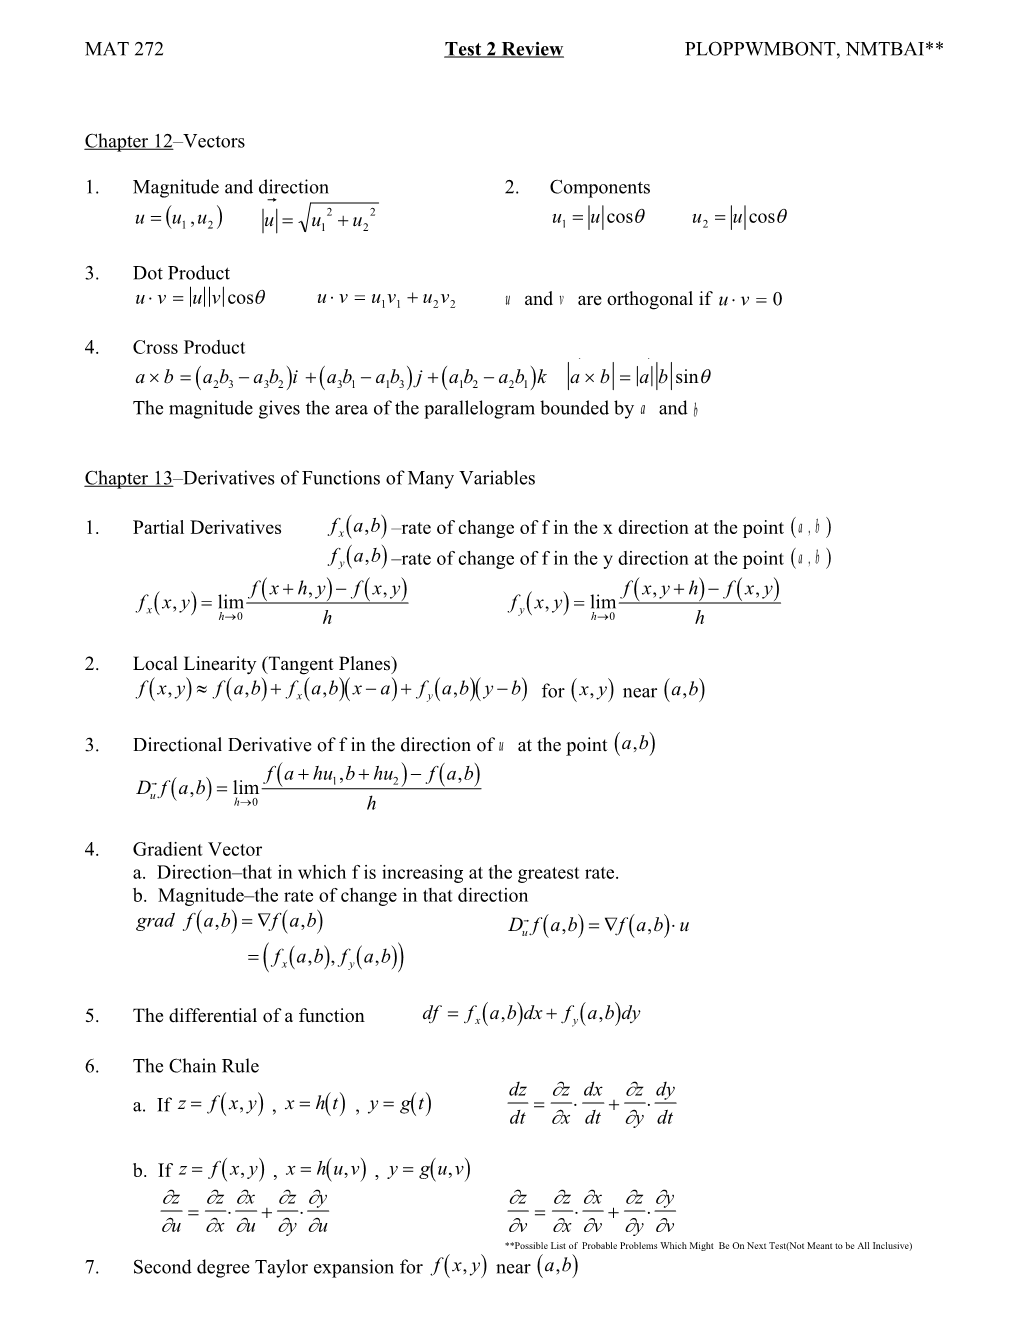 MAT 272 Computer Lab #11 Review of Chapters 12 and 13